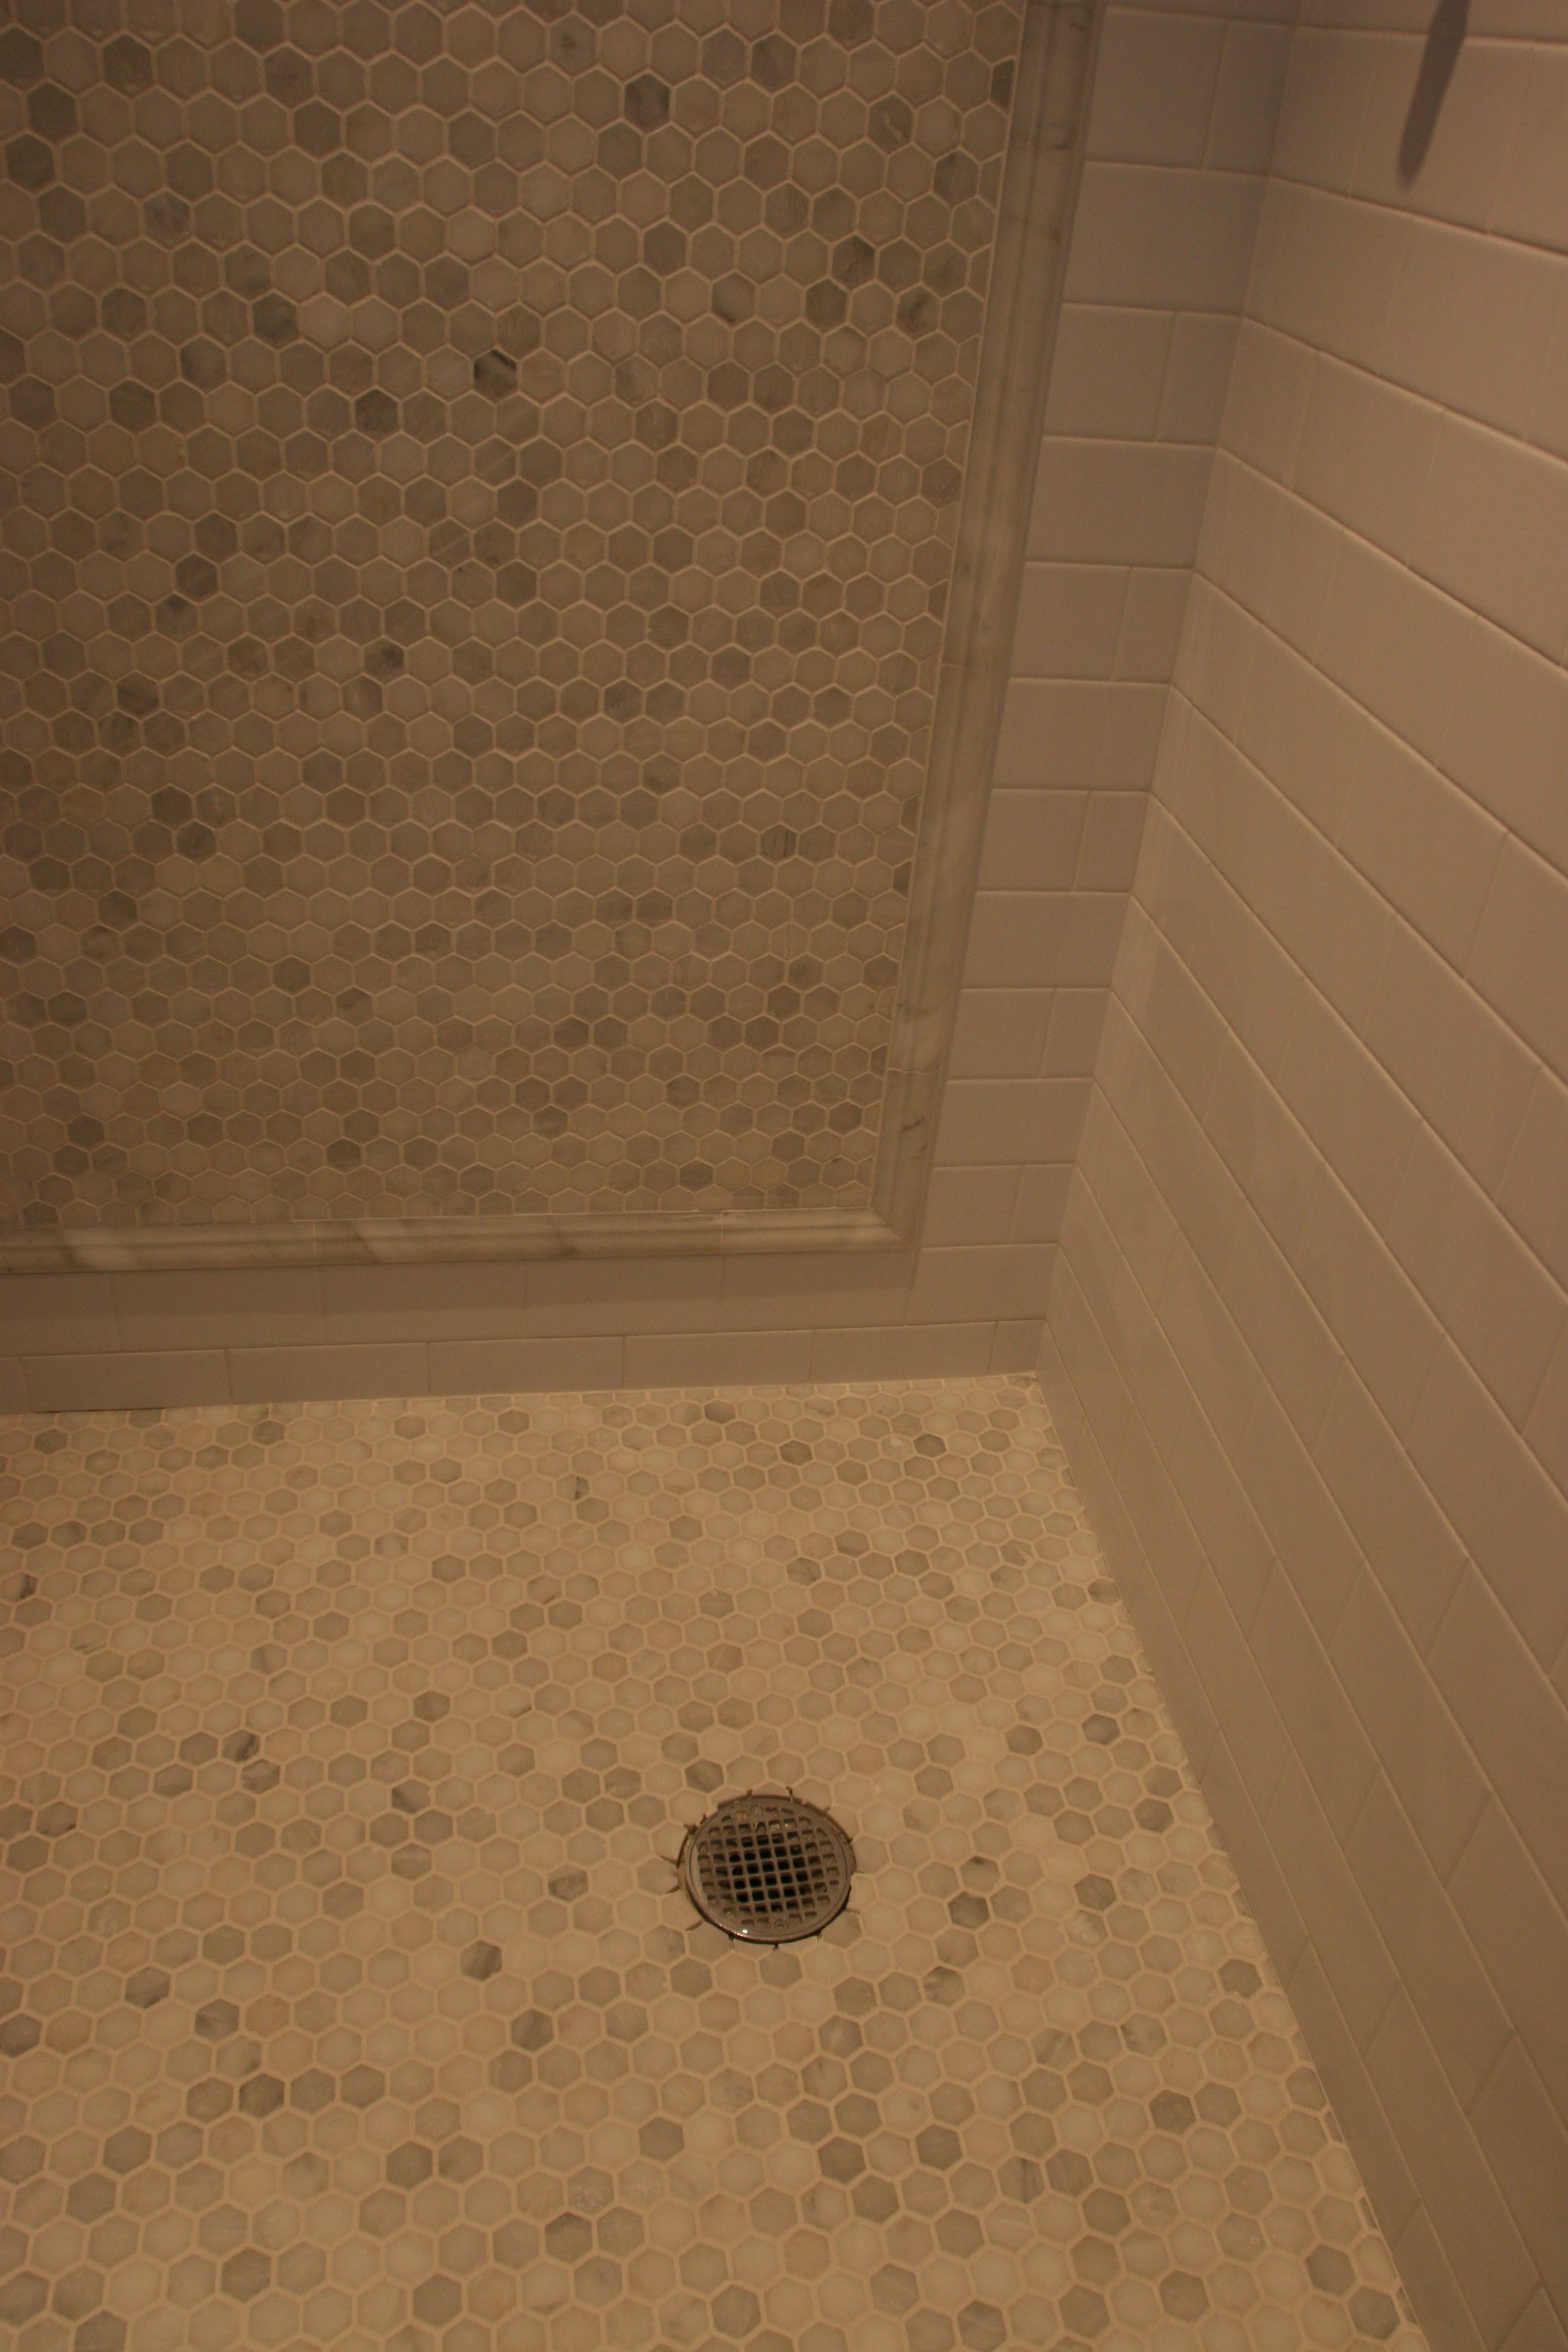 Grout DOES change everything! That little bit that's missing is on purpose - that shower drain is only temporary.